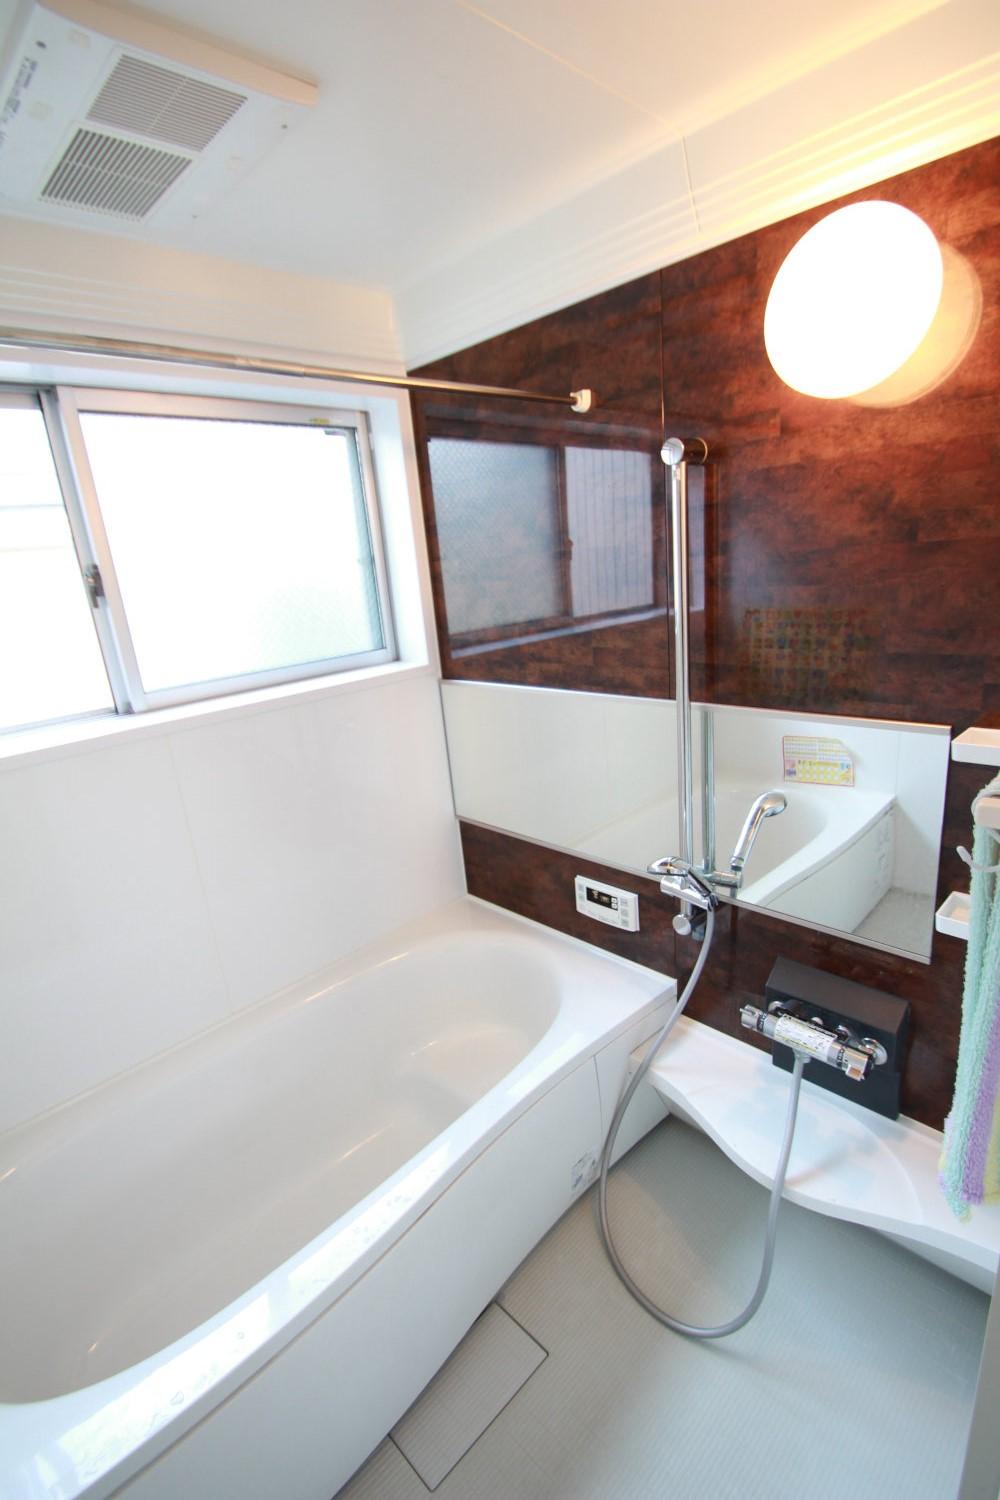 Bathroom. Spacious is the bathroom of 1 pyeong type. Since it becomes aware of bathroom ventilation drying heating, Even the weather is not good, You can hang out the laundry in the bathroom rather than a dry room.